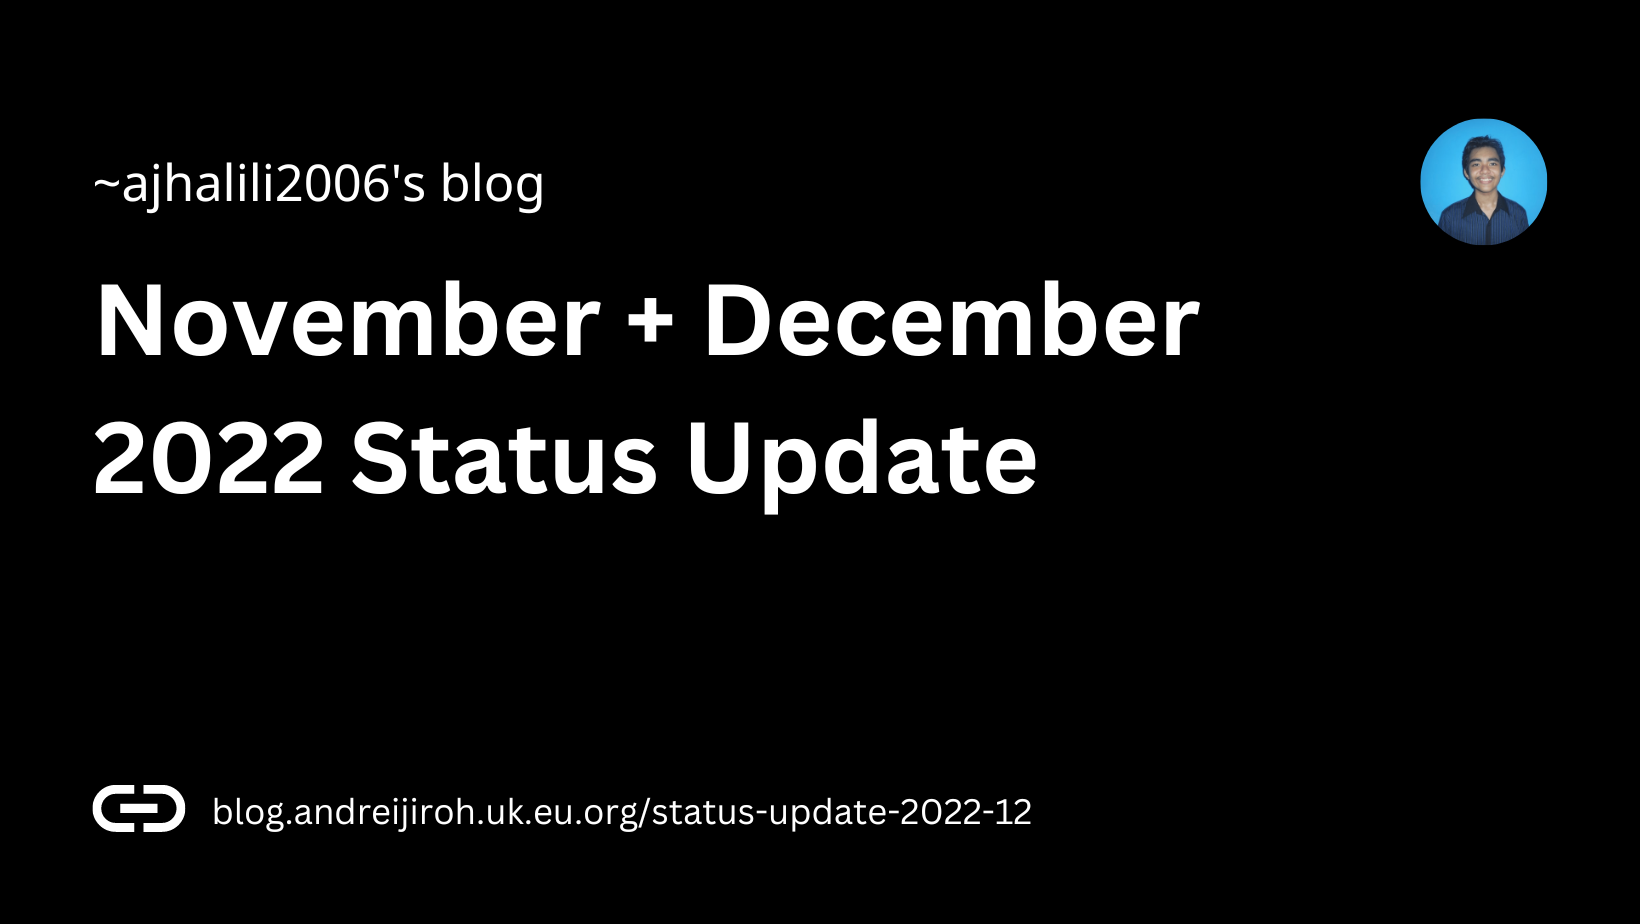 Header image for December 2022 status update, made with Canva.